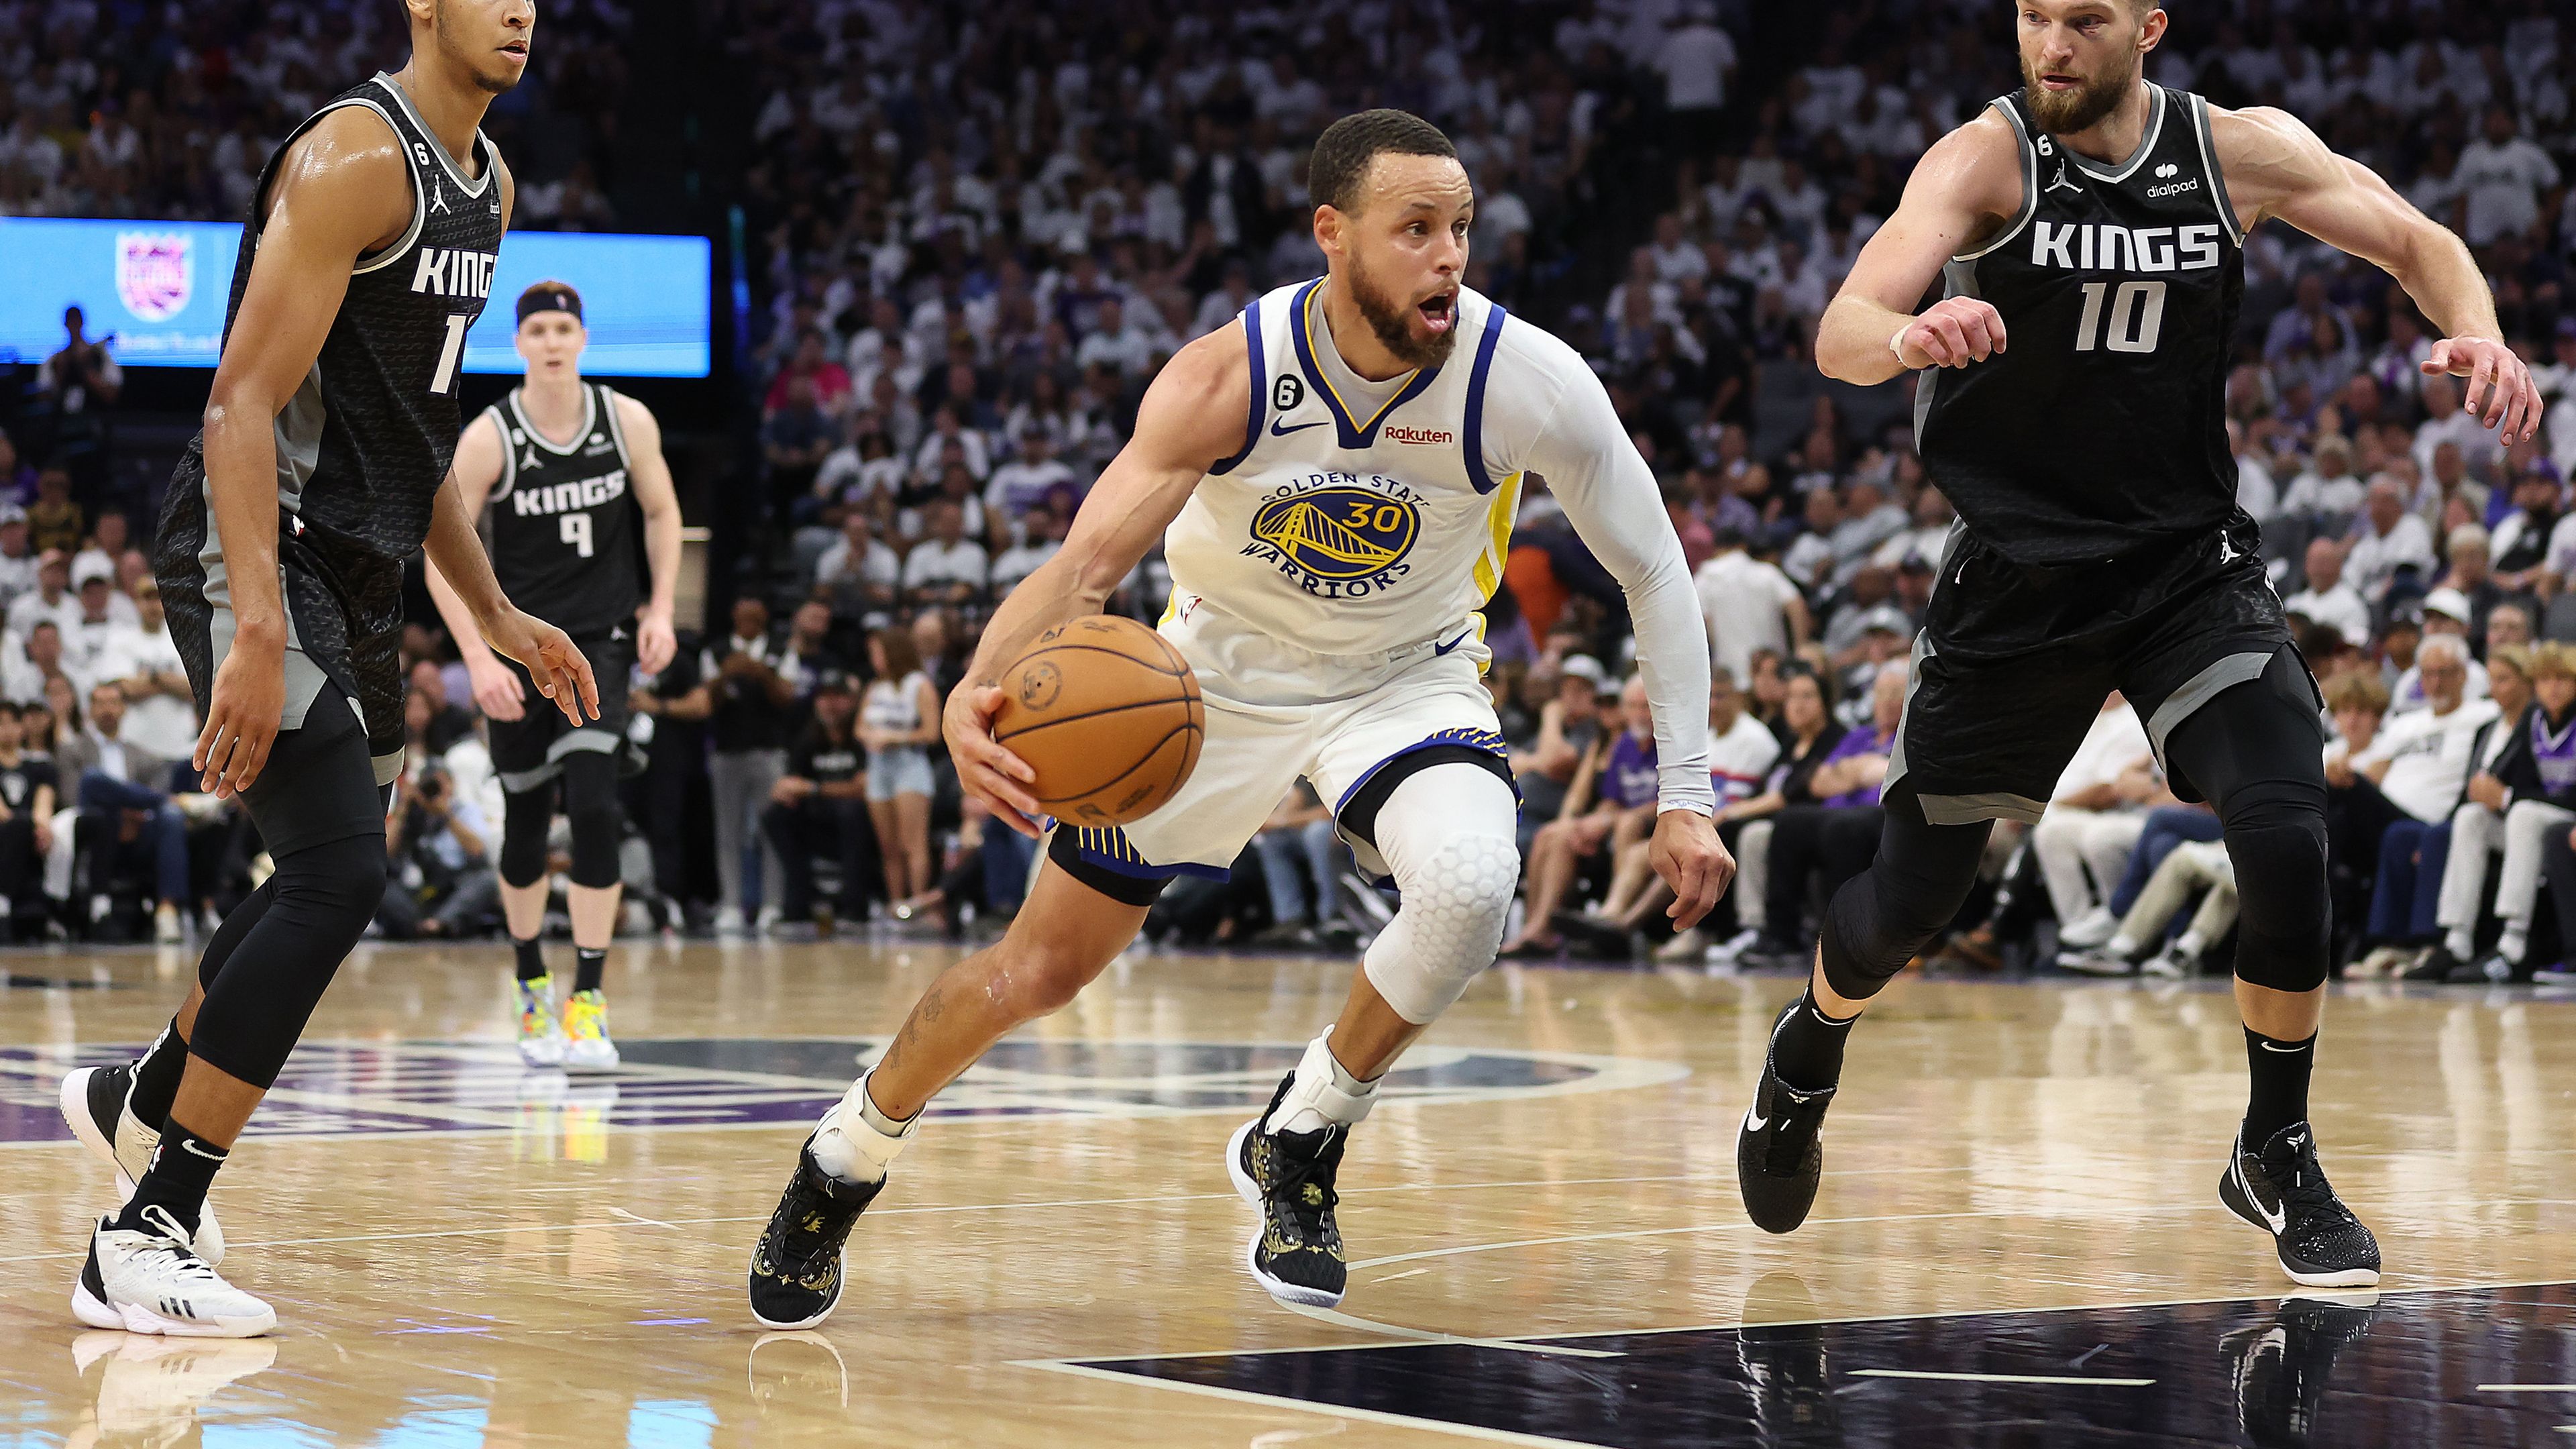 'Sublime' Stephen Curry breaks NBA record to lift Warriors to epic playoff victory